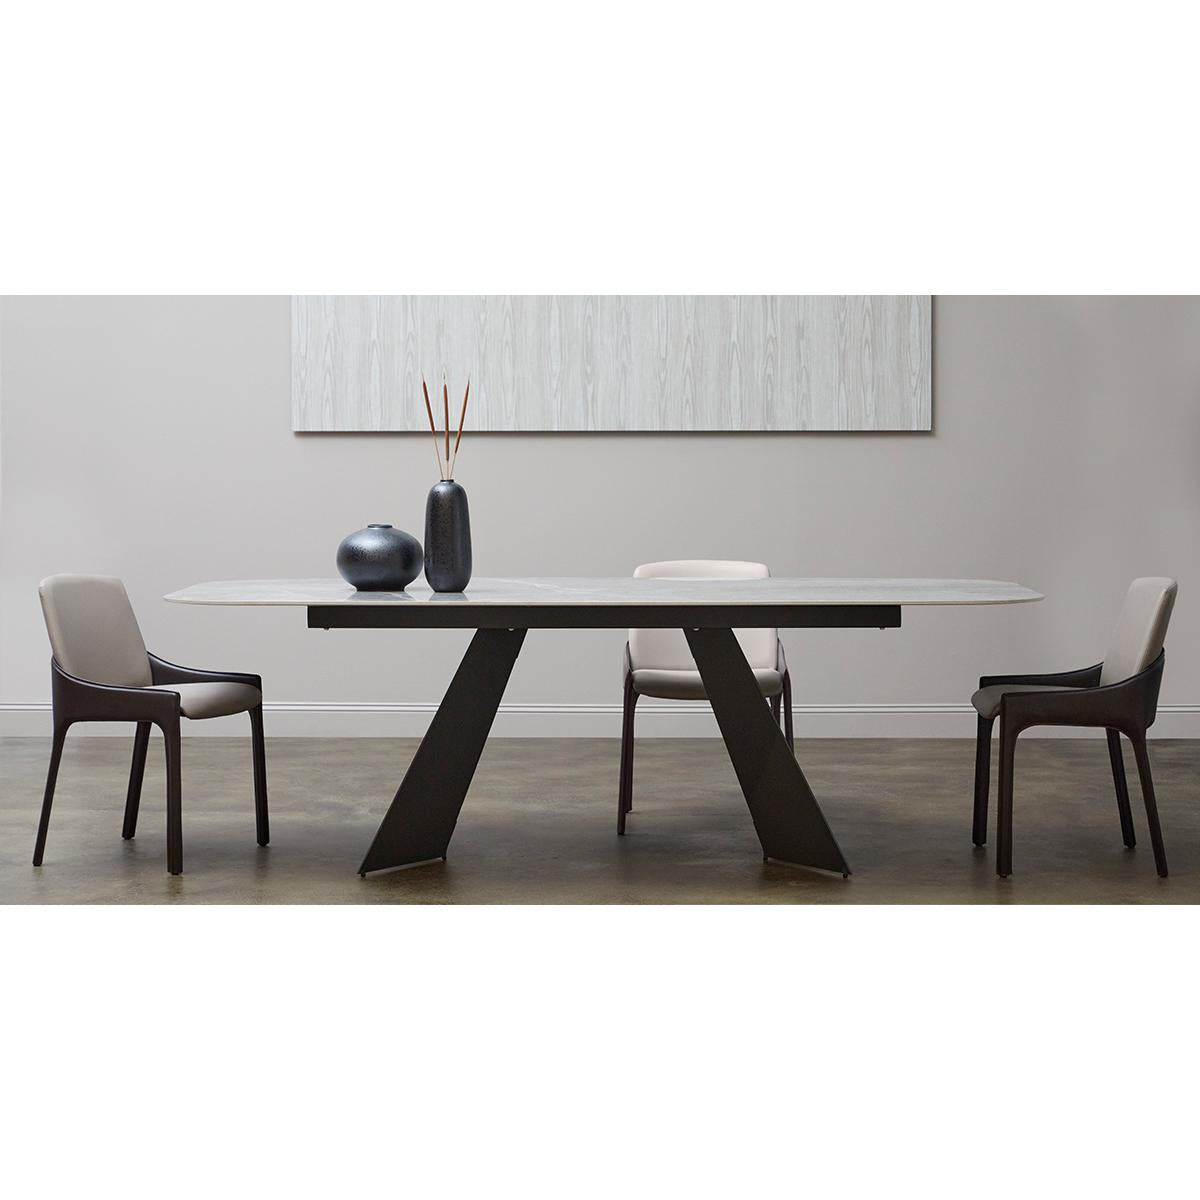 Lizarte 93" Dining Table - What A Room